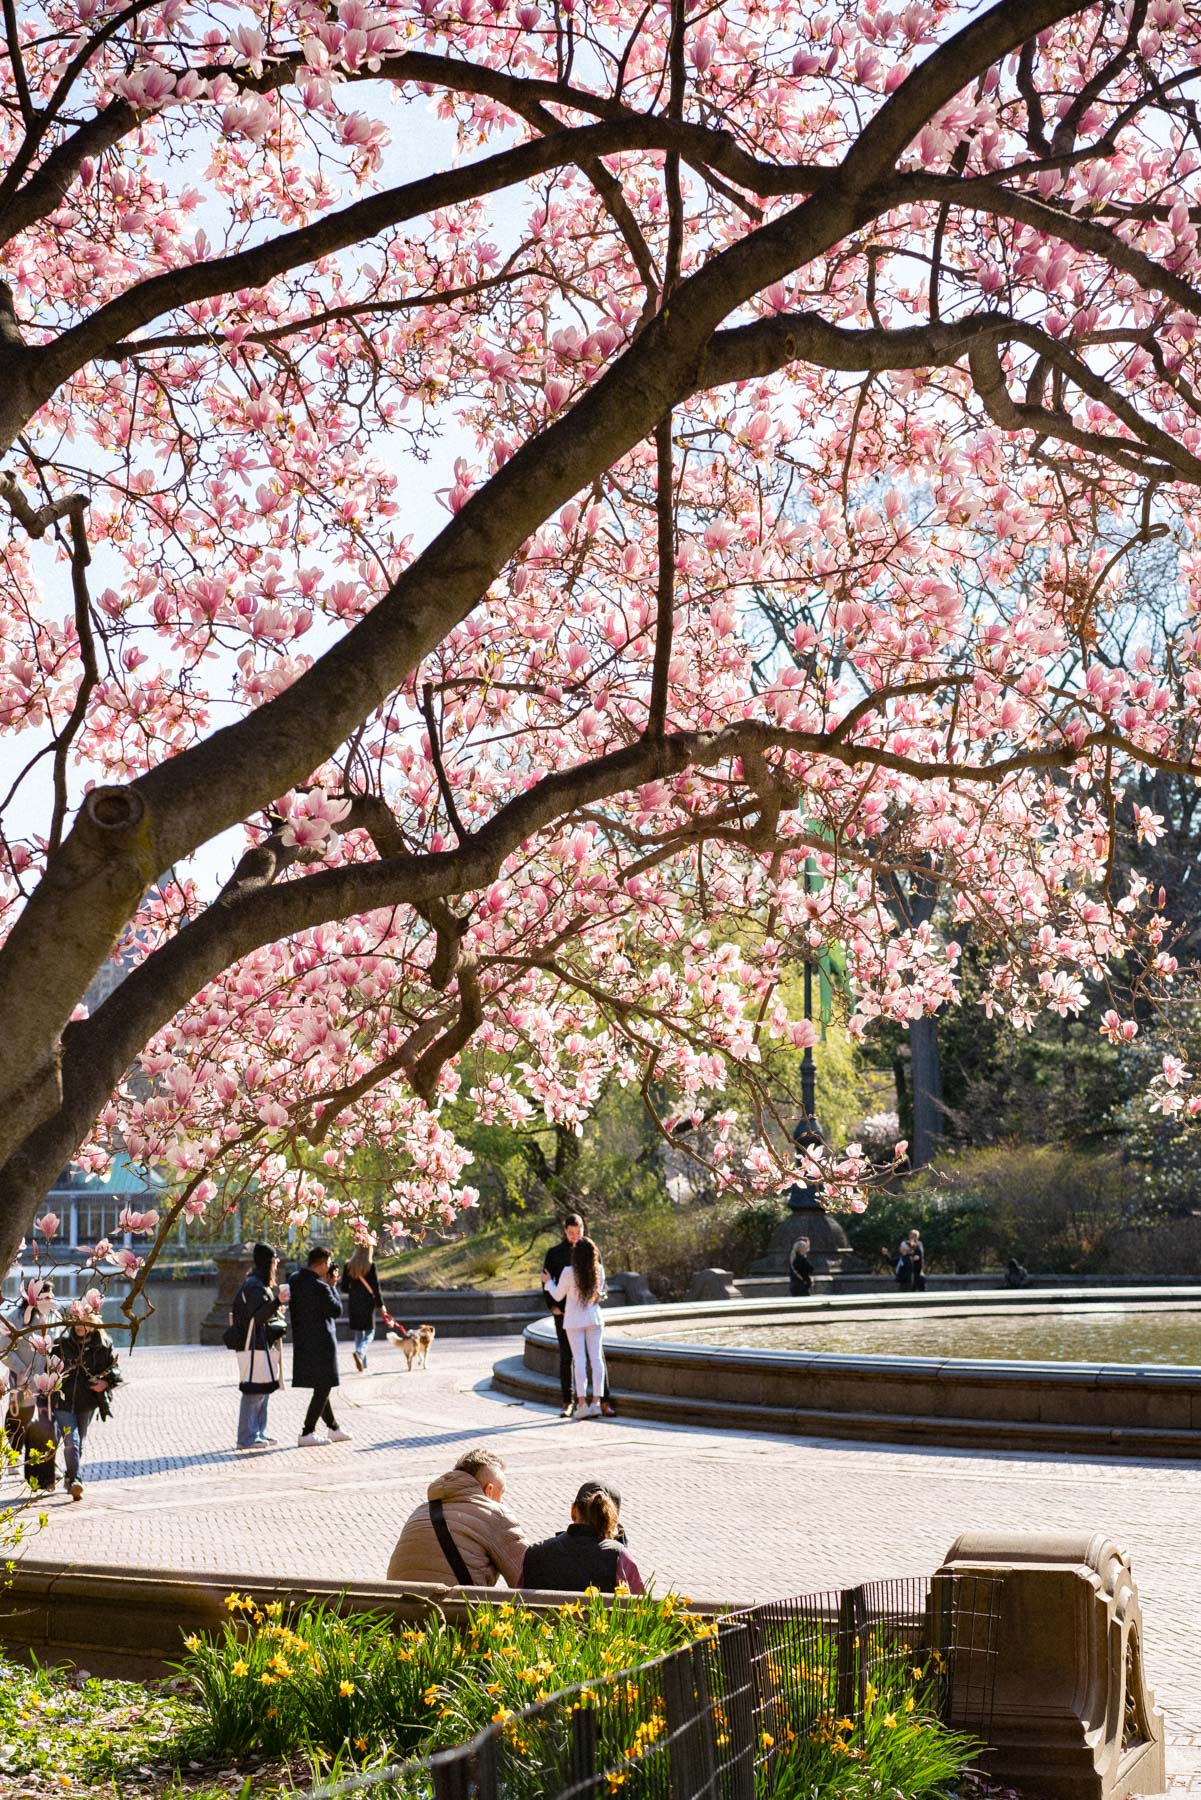 Cherry blossoms in Central Park, Bethesda Fountain